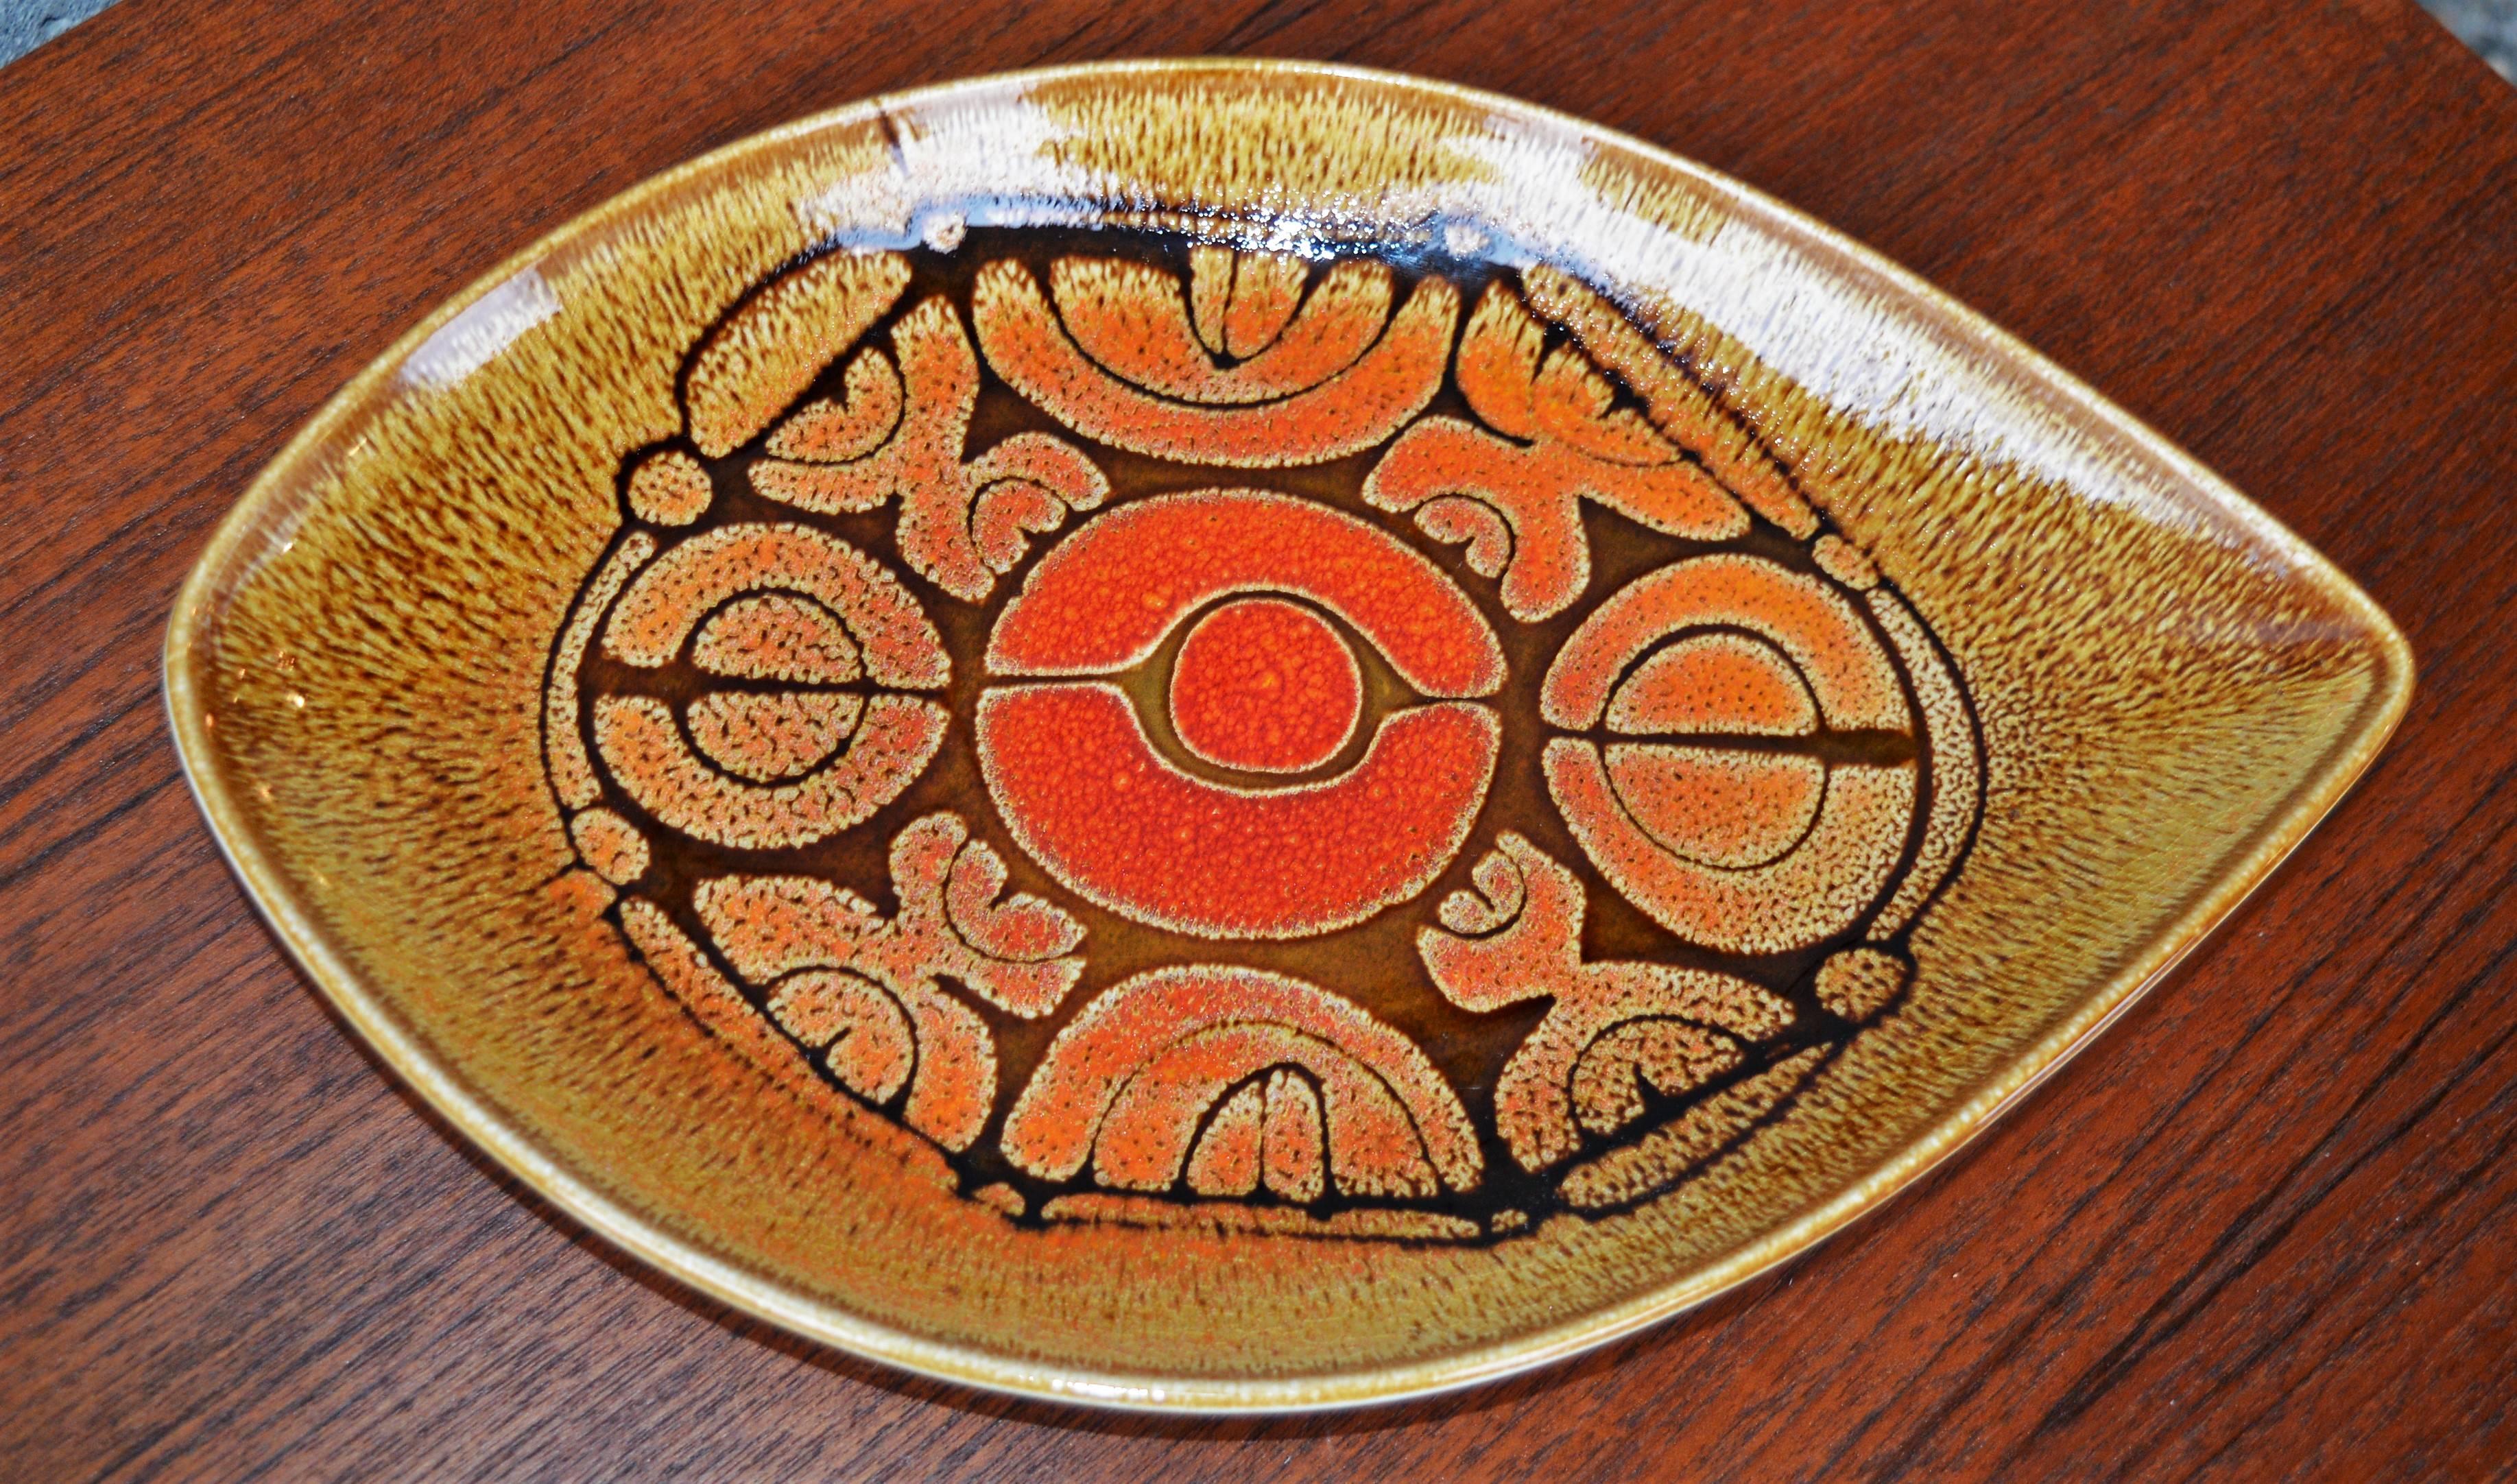 This delightful set of three Poole pottery dishes have wonderful abstract designs in oranges, golds and browns and a distinctive leaf shape. From the Aegean series, 1970s, and in excellent condition with minor crazing to the glaze typical for their